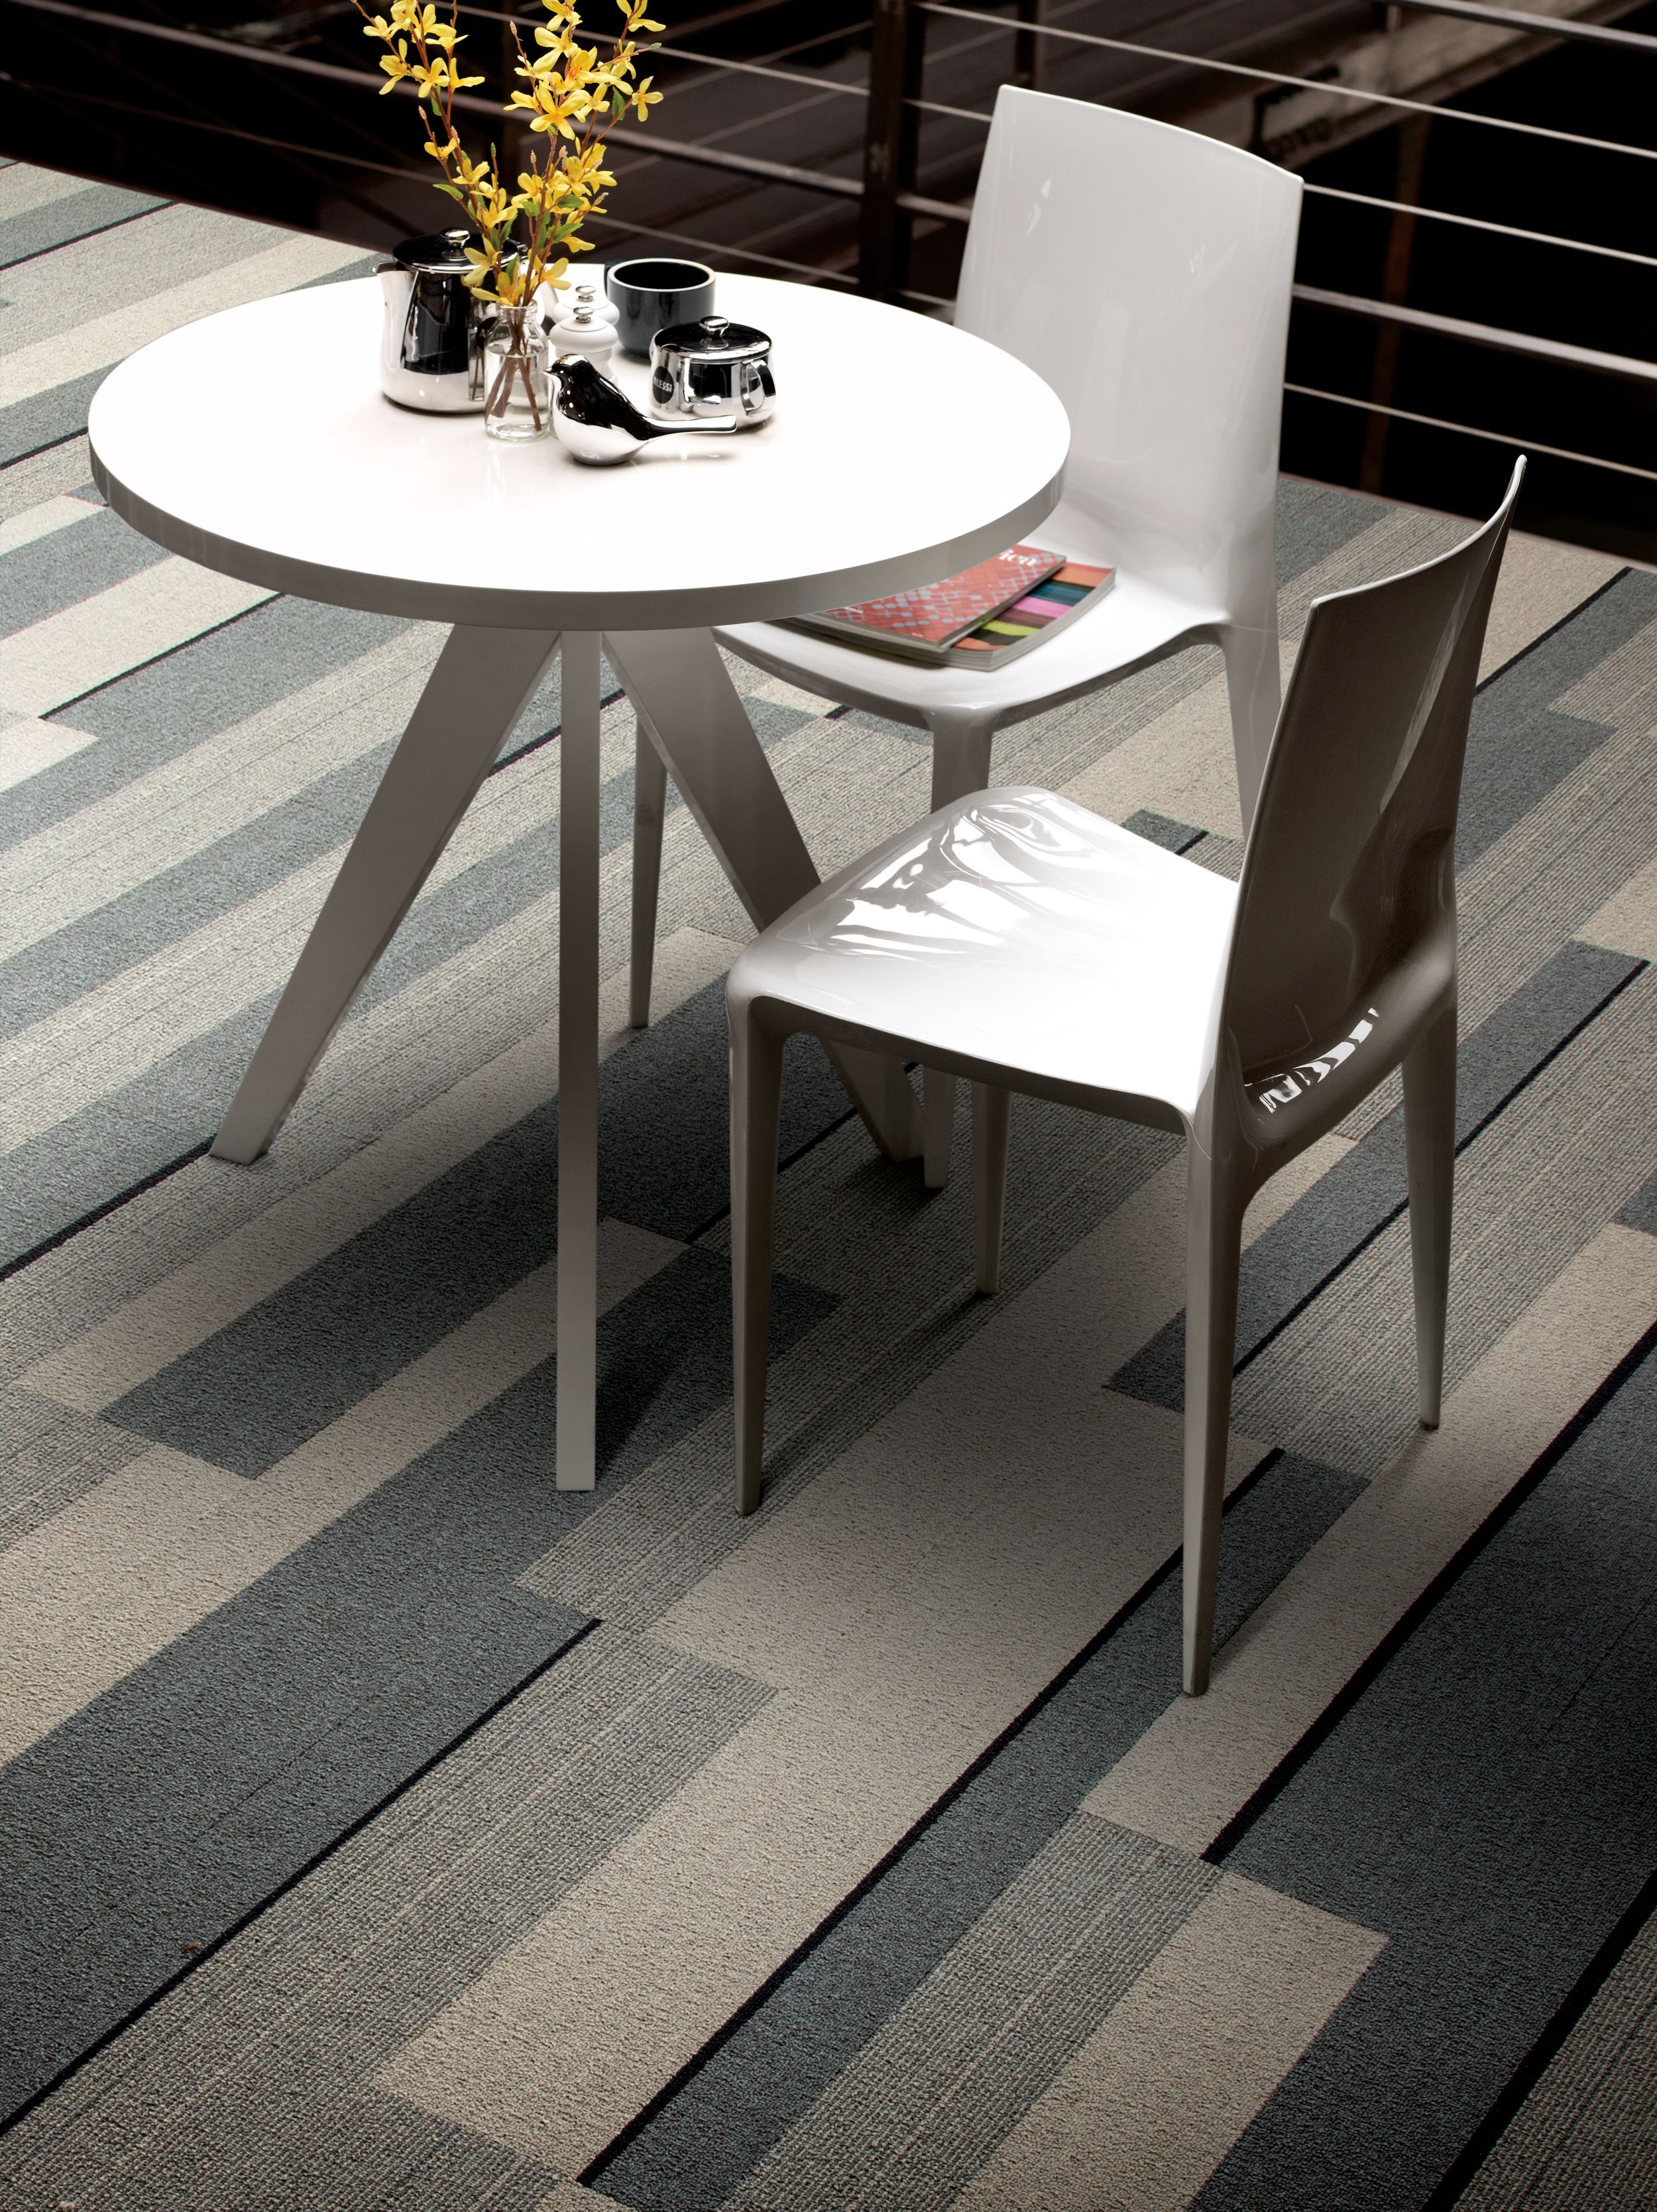 Interface PH210 plank carpet tile in small seating area with flowers on table image number 1